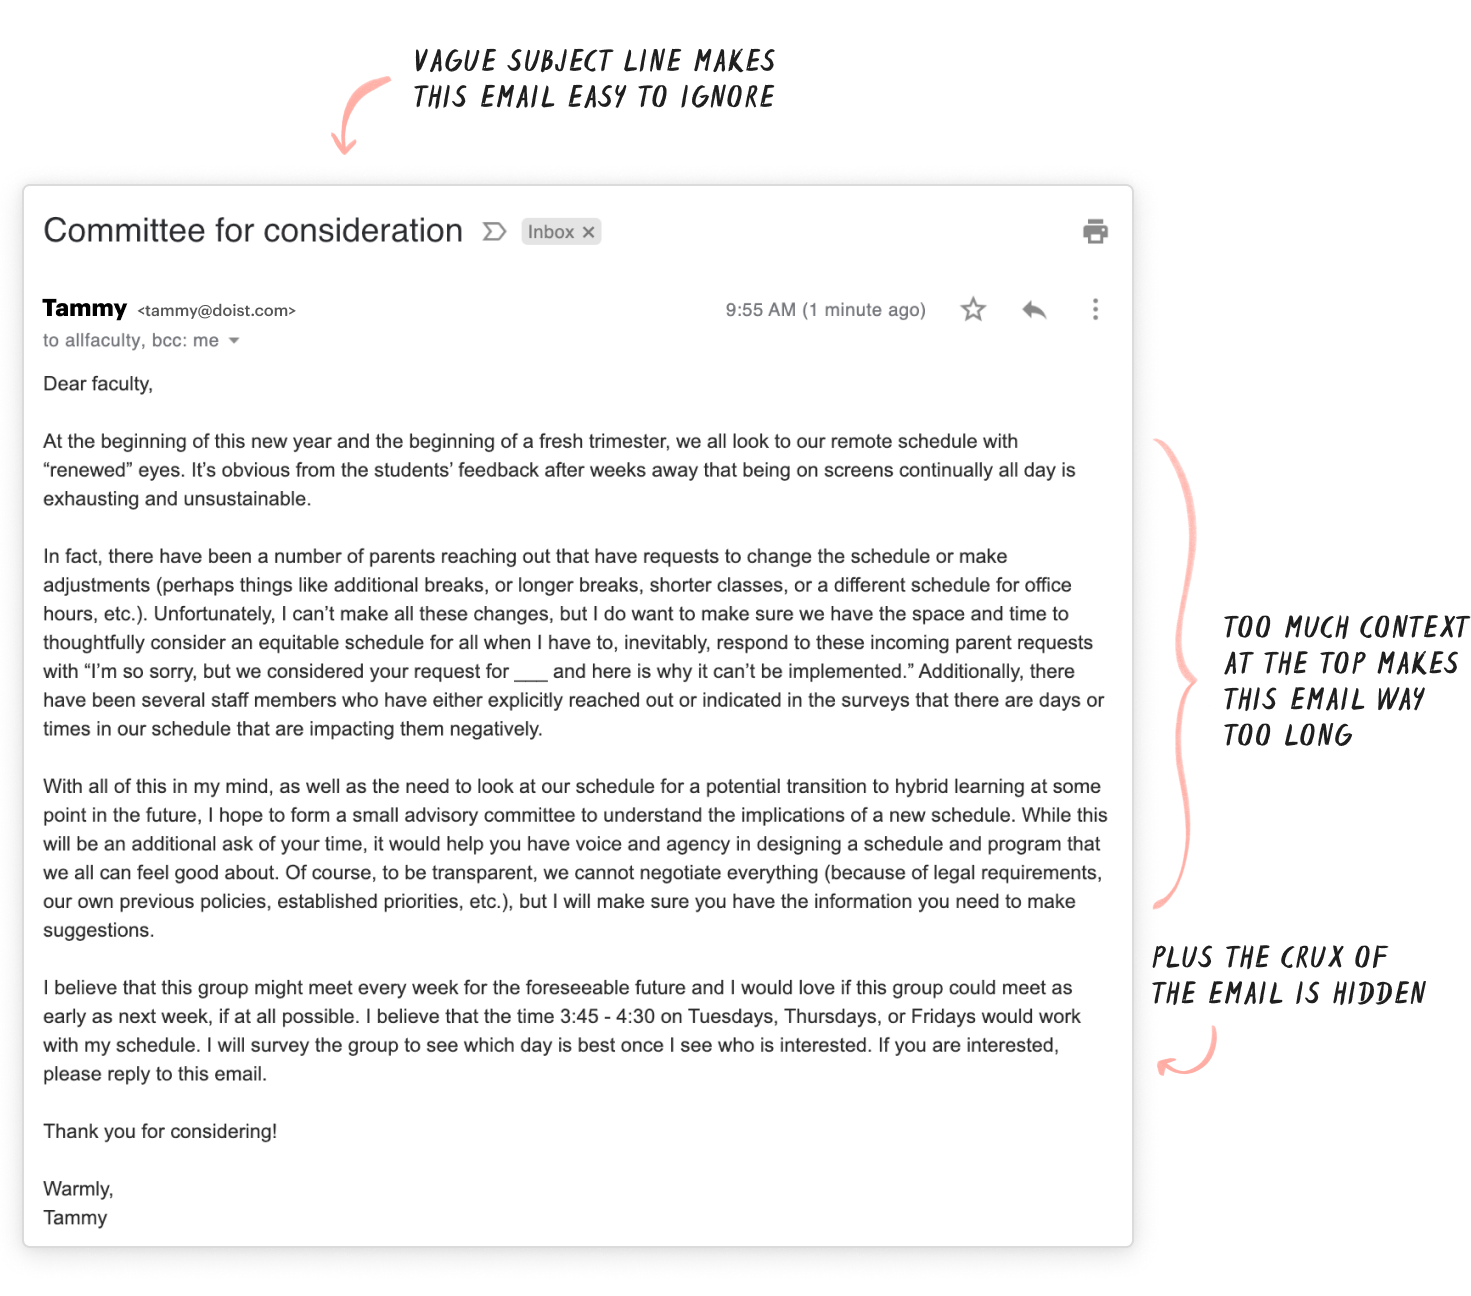 An example of a poorly written email attempting to schedule a committee meeting has 3 annotations: Vague subject line makes the subject easy to ignore. Too much context at the top makes this email way too long. Plus the crux of the email is hidden. End description.